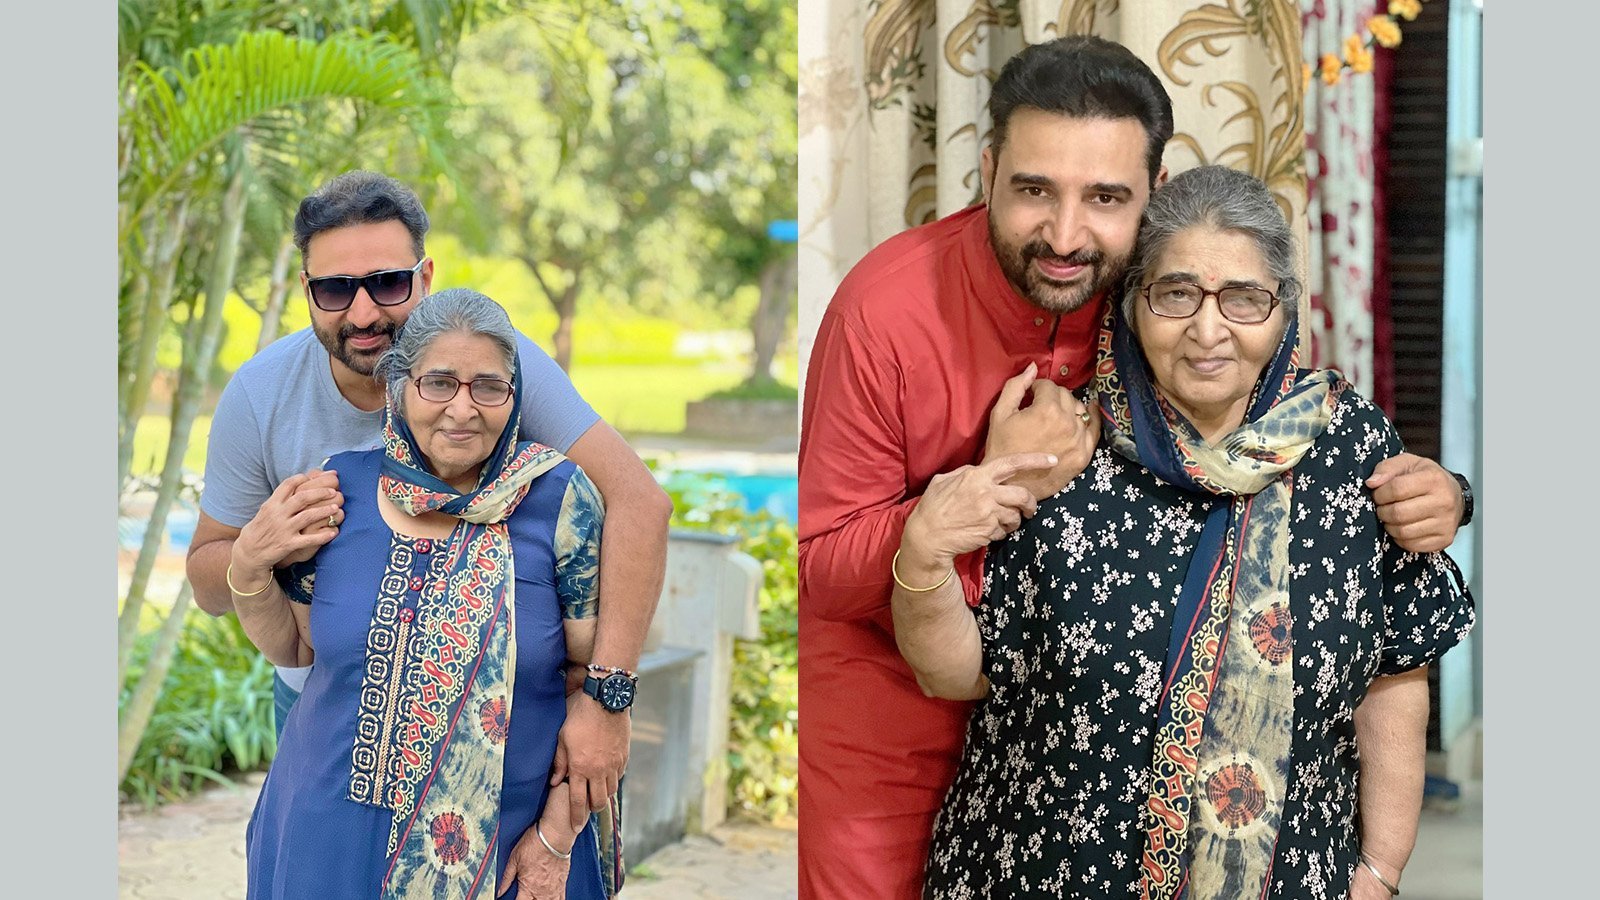 Romanch Celebrates mother’s birthday with a heartfelt VIDEO, calls her the ‘True Star’ of his life